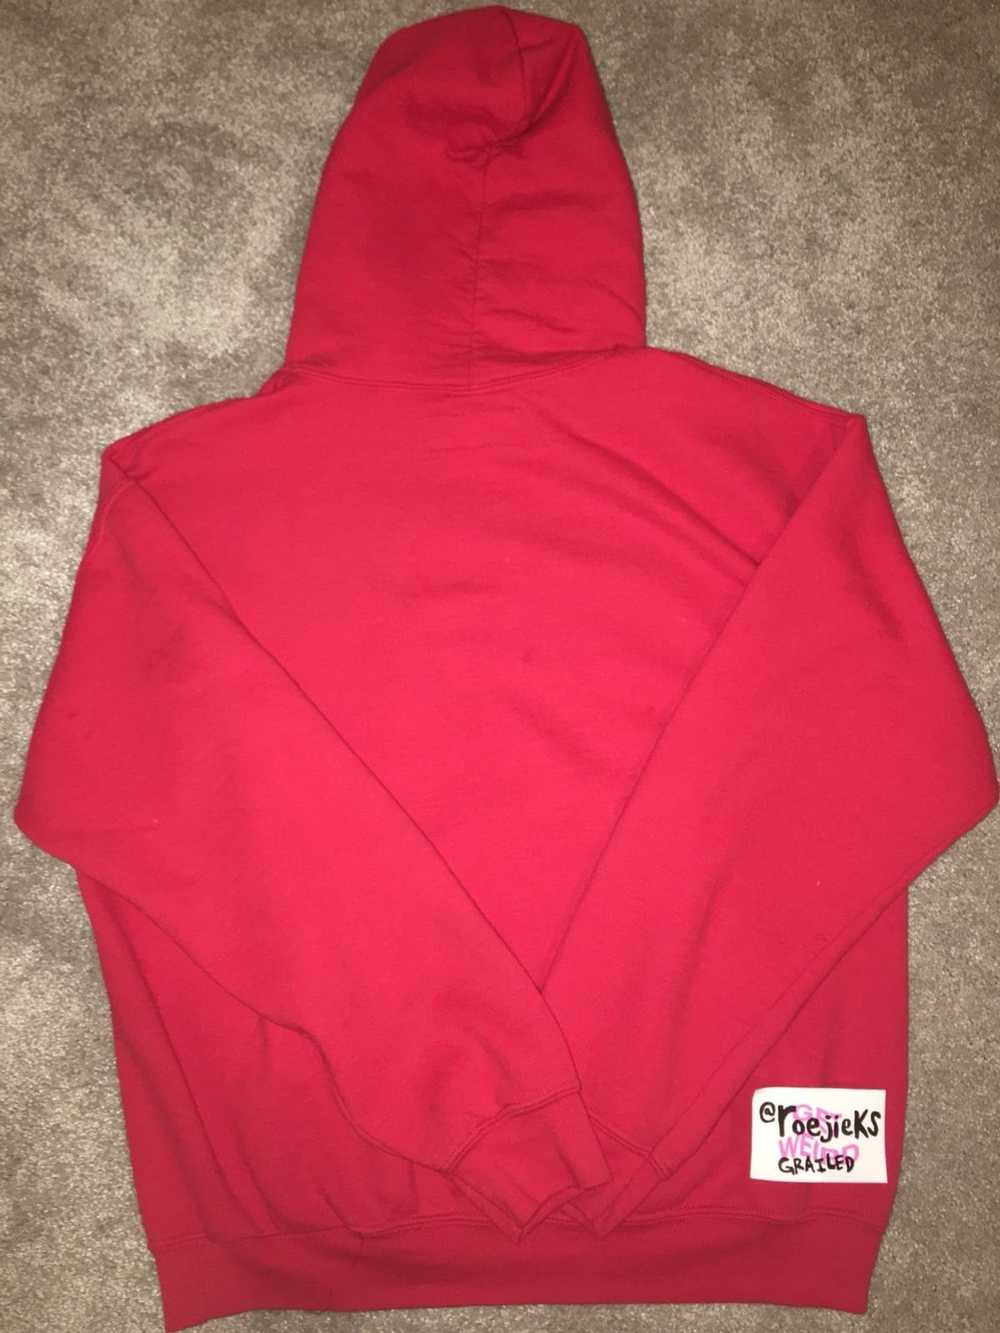 Bianca Chandon Red Lover Hoodie - image 3